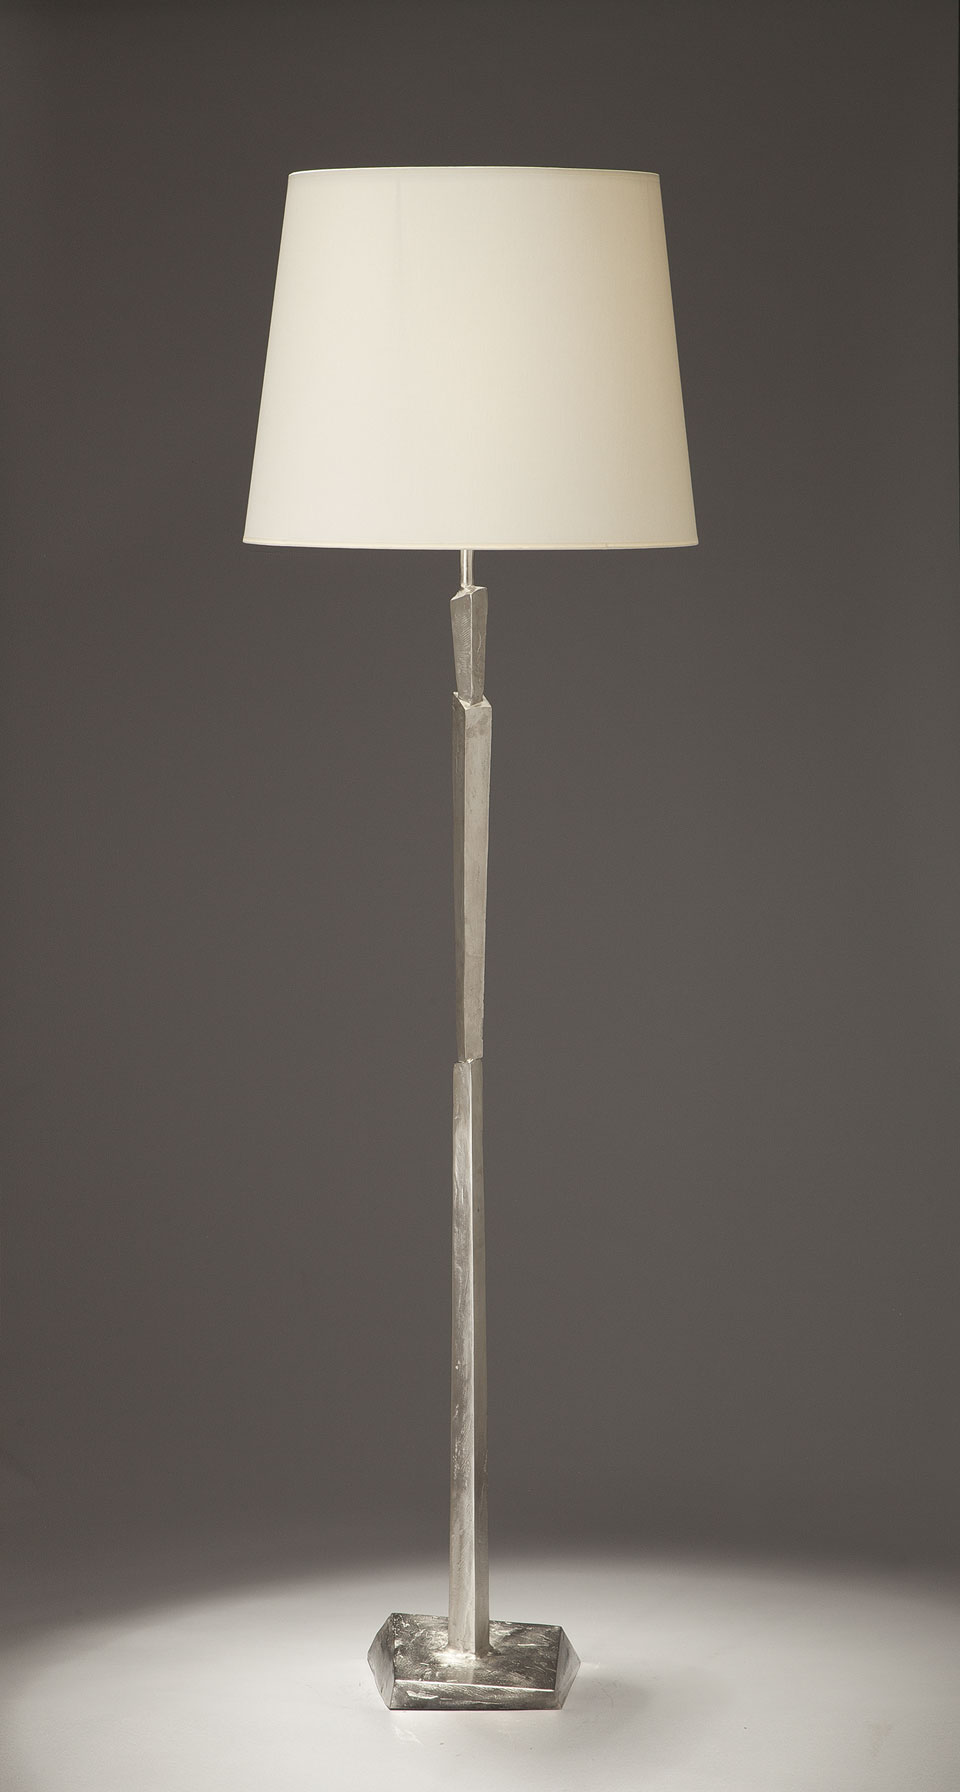 Cubist nickel floor lamp with satin finish and white lampshade. Objet insolite. 